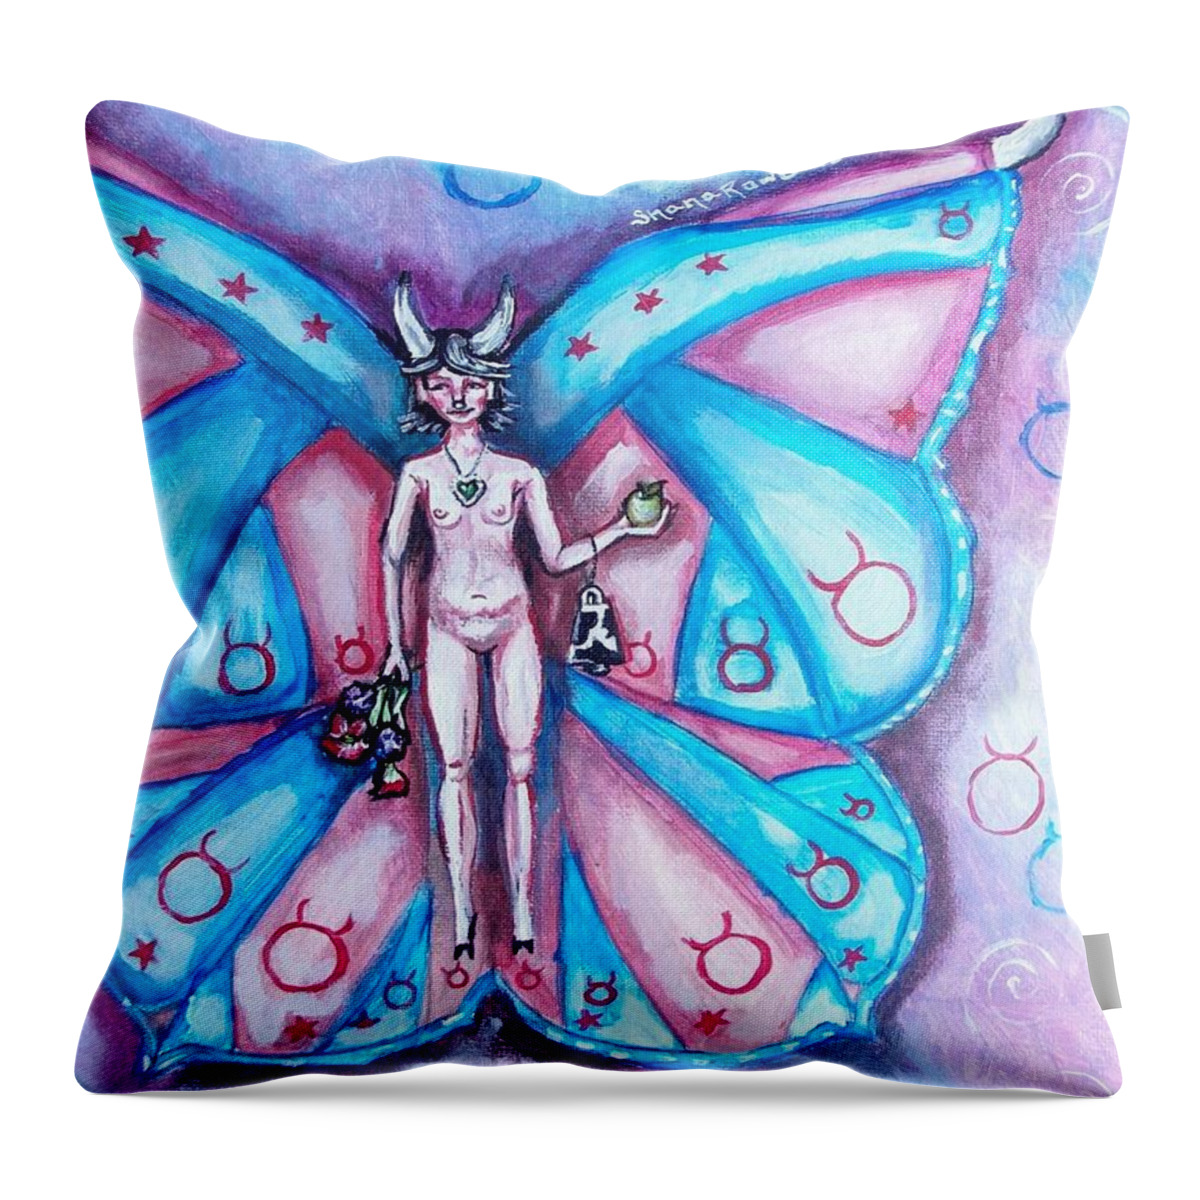 Taurus Throw Pillow featuring the painting Free as a Taurus by Shana Rowe Jackson